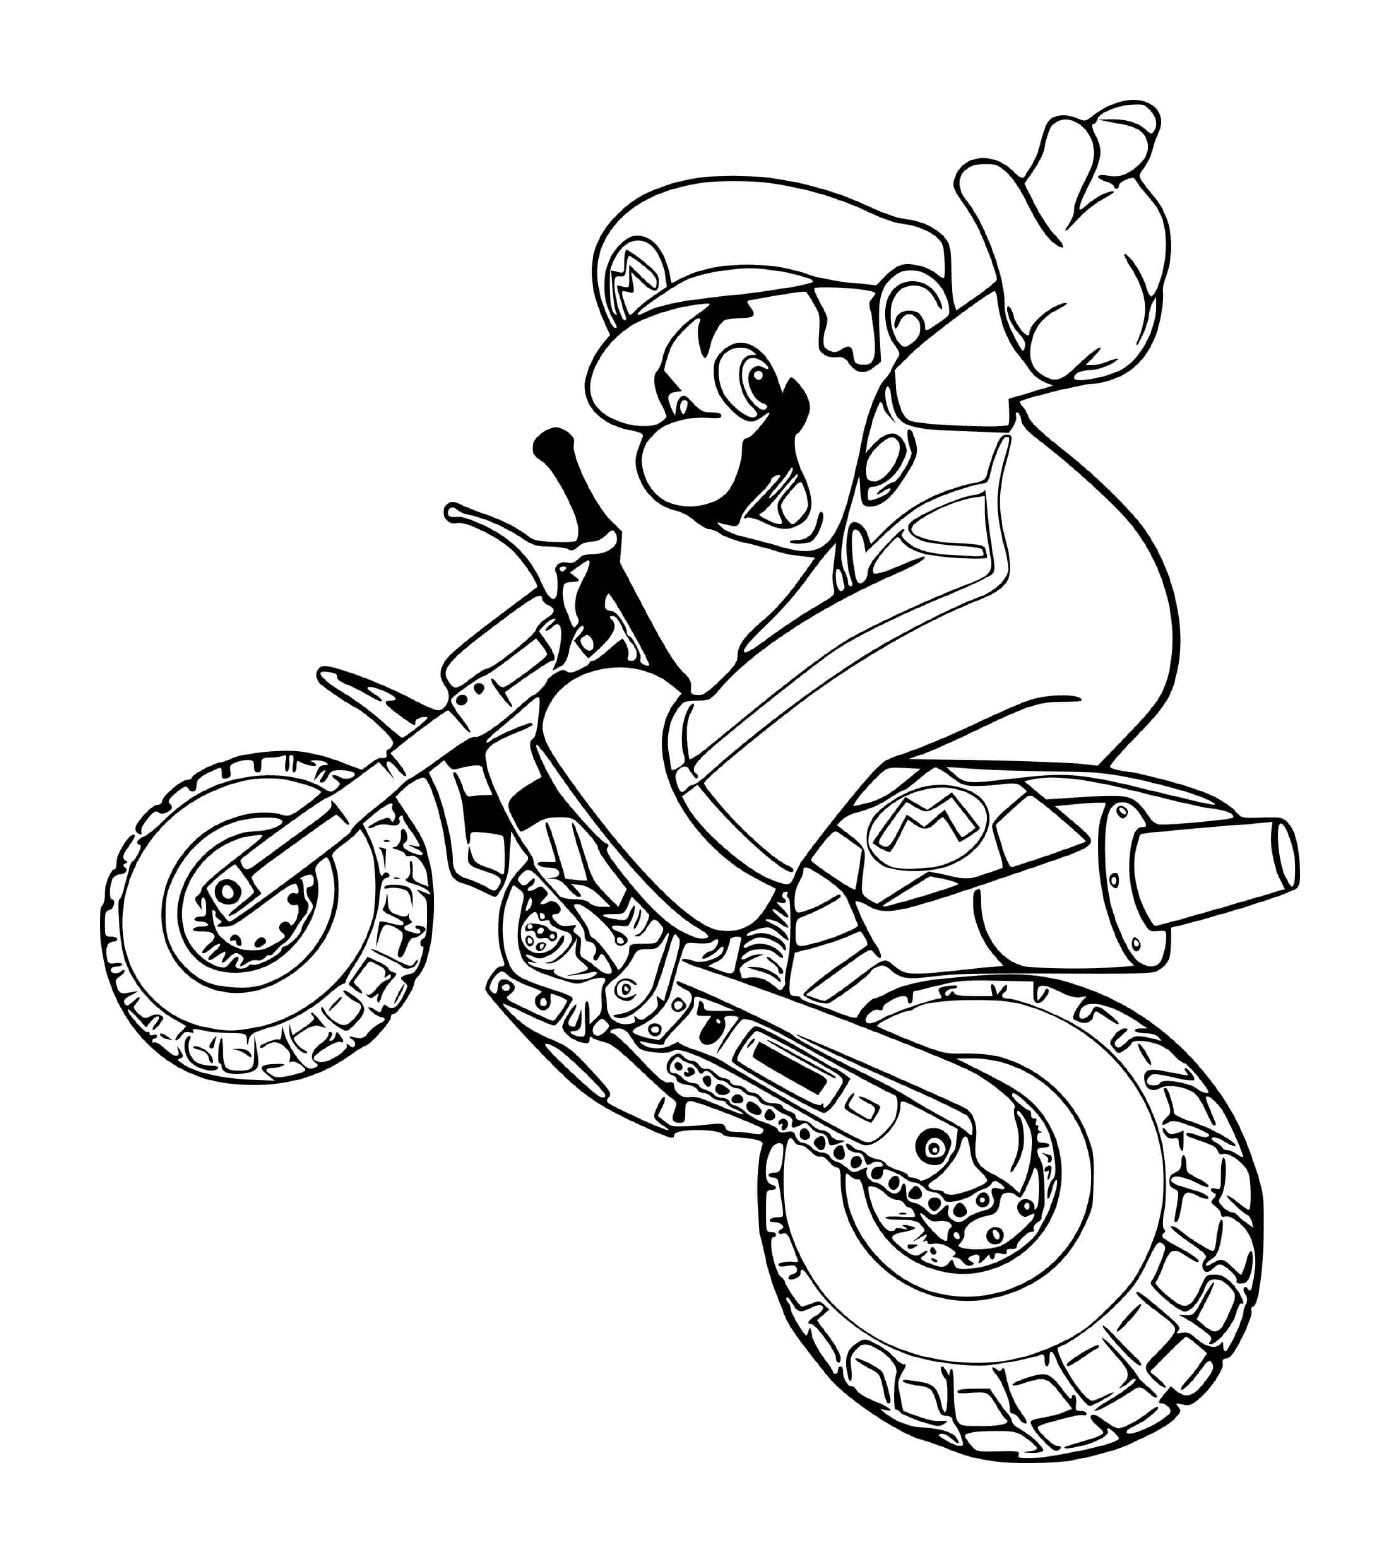  A man in motorcycle mode 